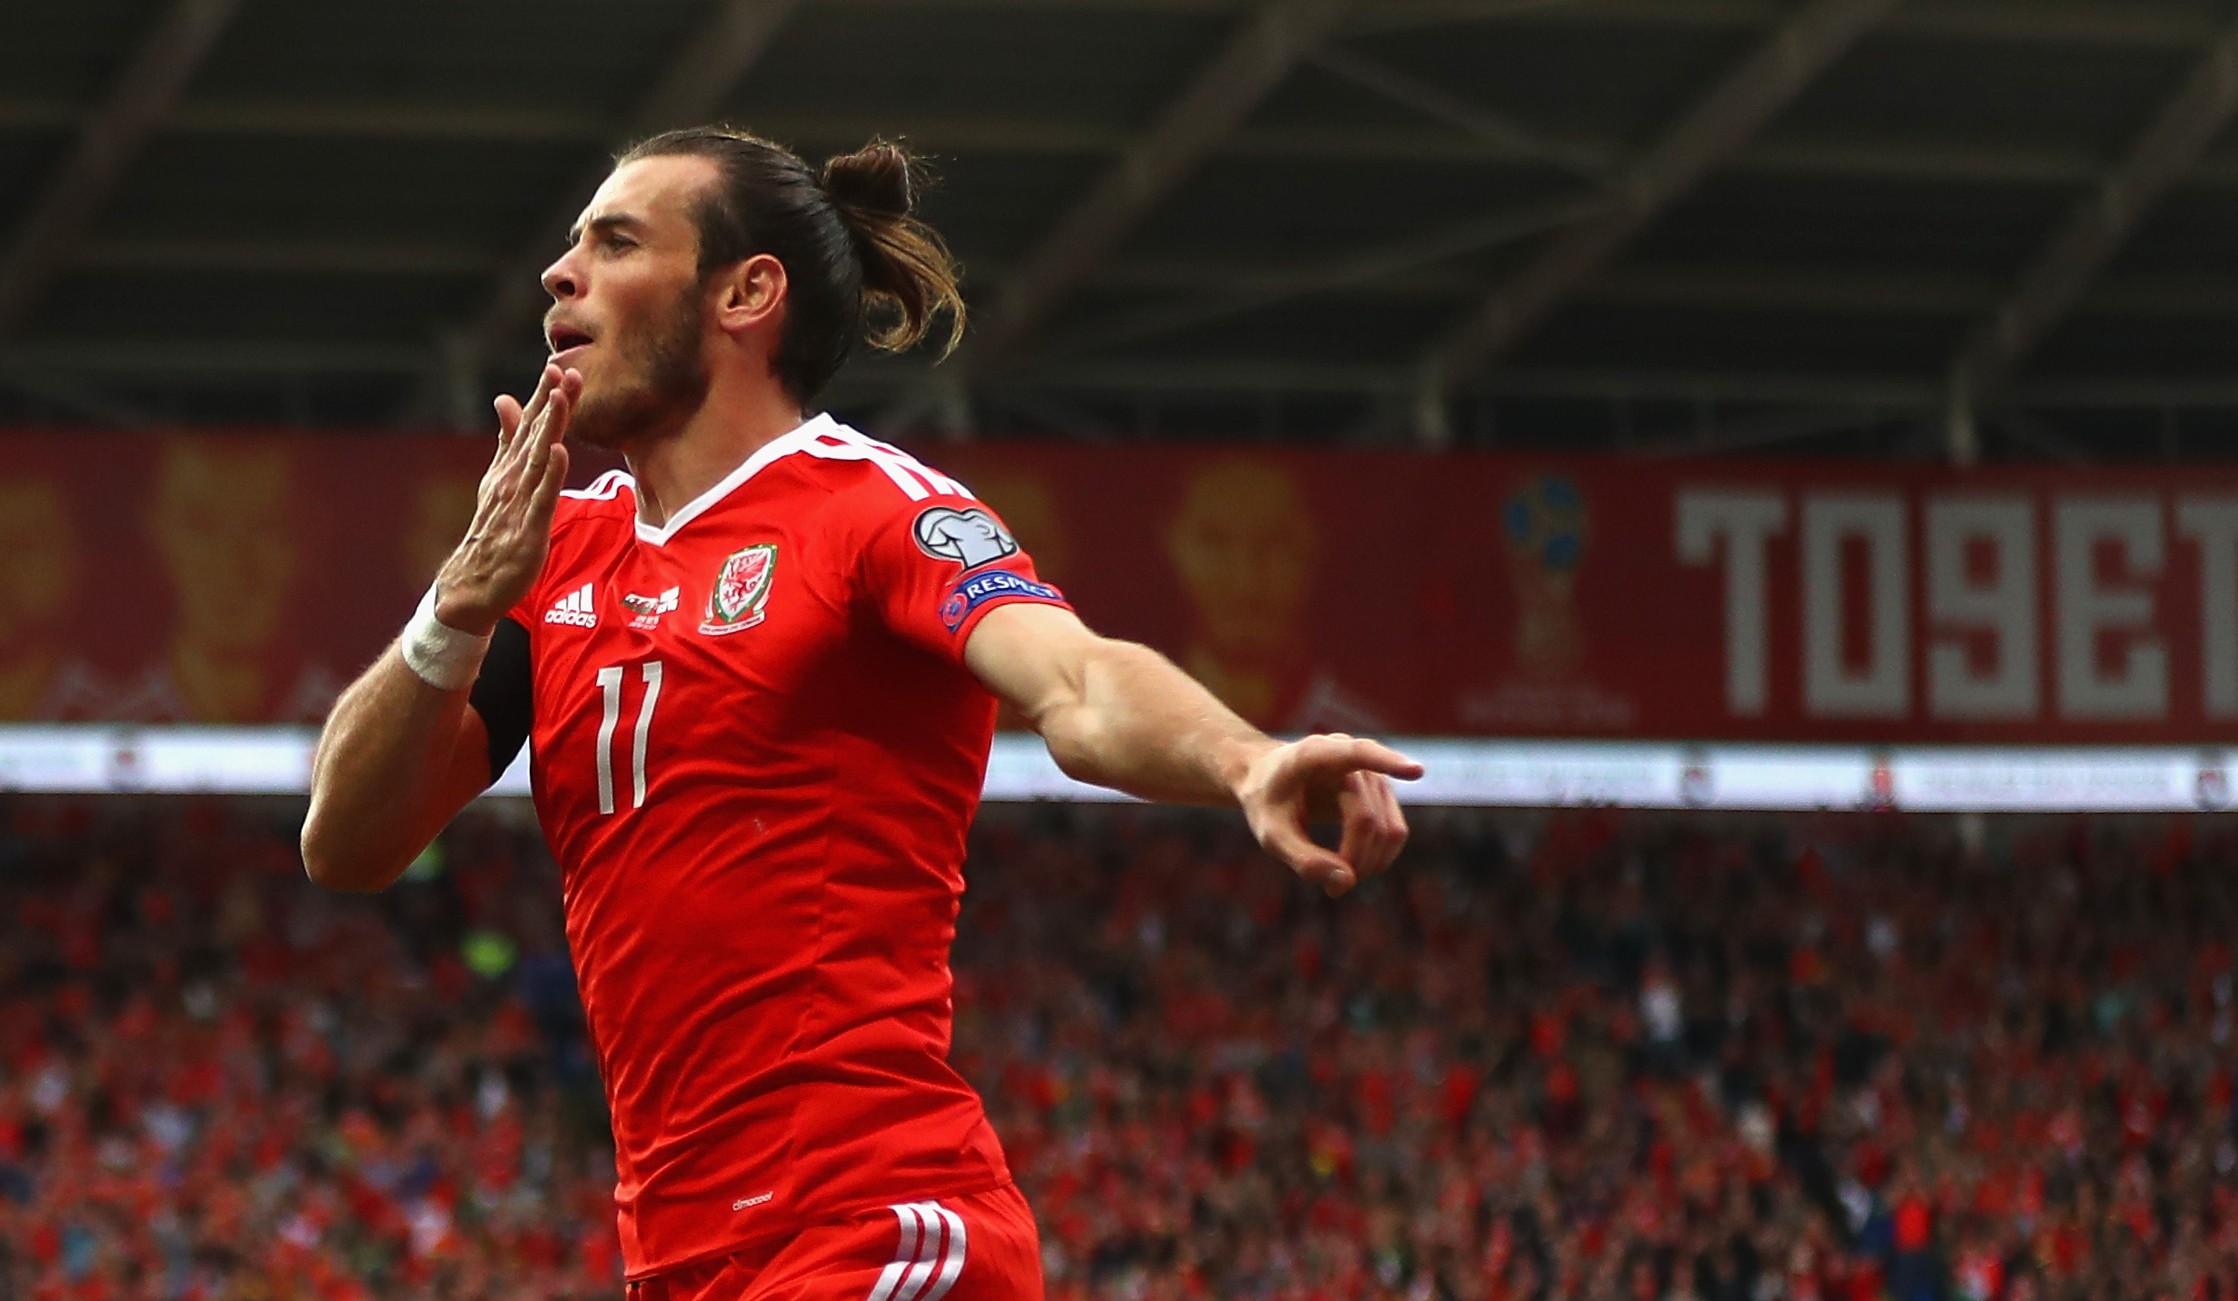 CARDIFF, WALES - OCTOBER 09:  Gareth Bale of Wales celebrates scoring the opening goal during the FIFA 2018 World Cup Qualifier Group D match between Wales and Georgia at Cardiff City Stadium on October 9, 2016 in Cardiff, Wales.  (Photo by Michael Steele/Getty Images)